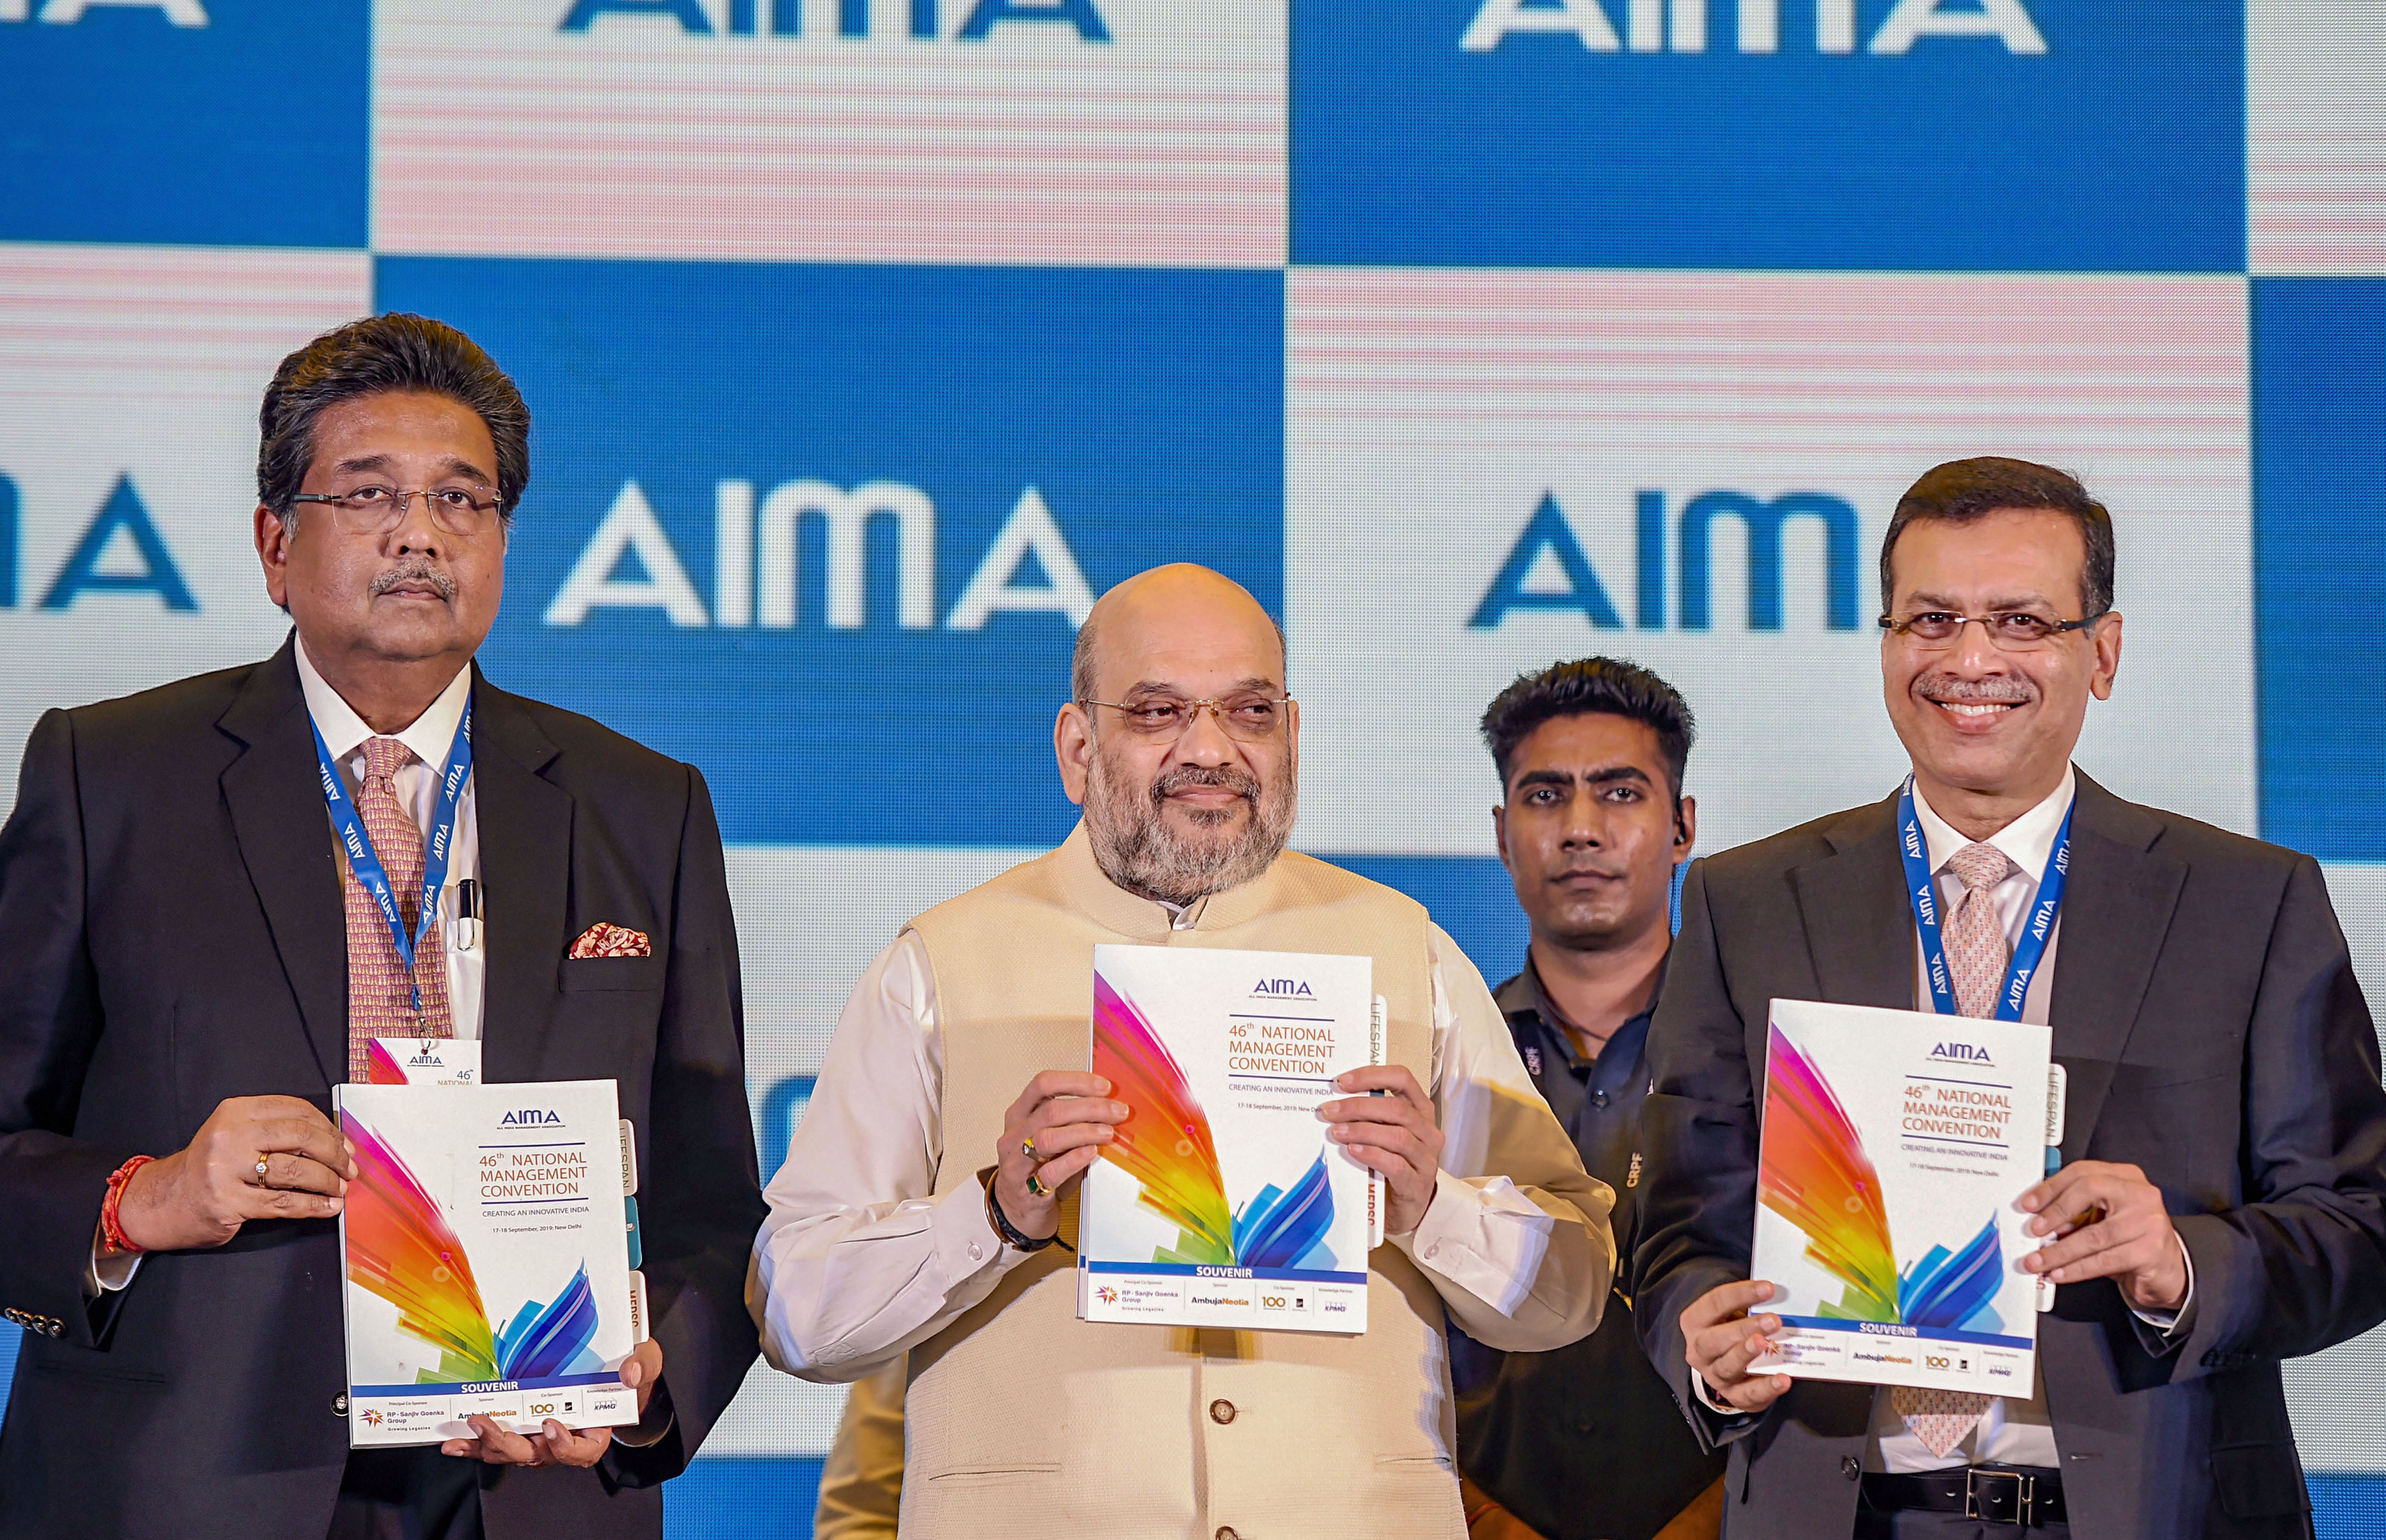 Home Minister Amit Shah, RP-Sanjiv Goenka Group Chairman Sanjiv Goenka and Ambuja Neotia Group Chairman Harshavardhan Neotia release the convention souvenir during the 46th National Management Convention of the AIMA - PTI